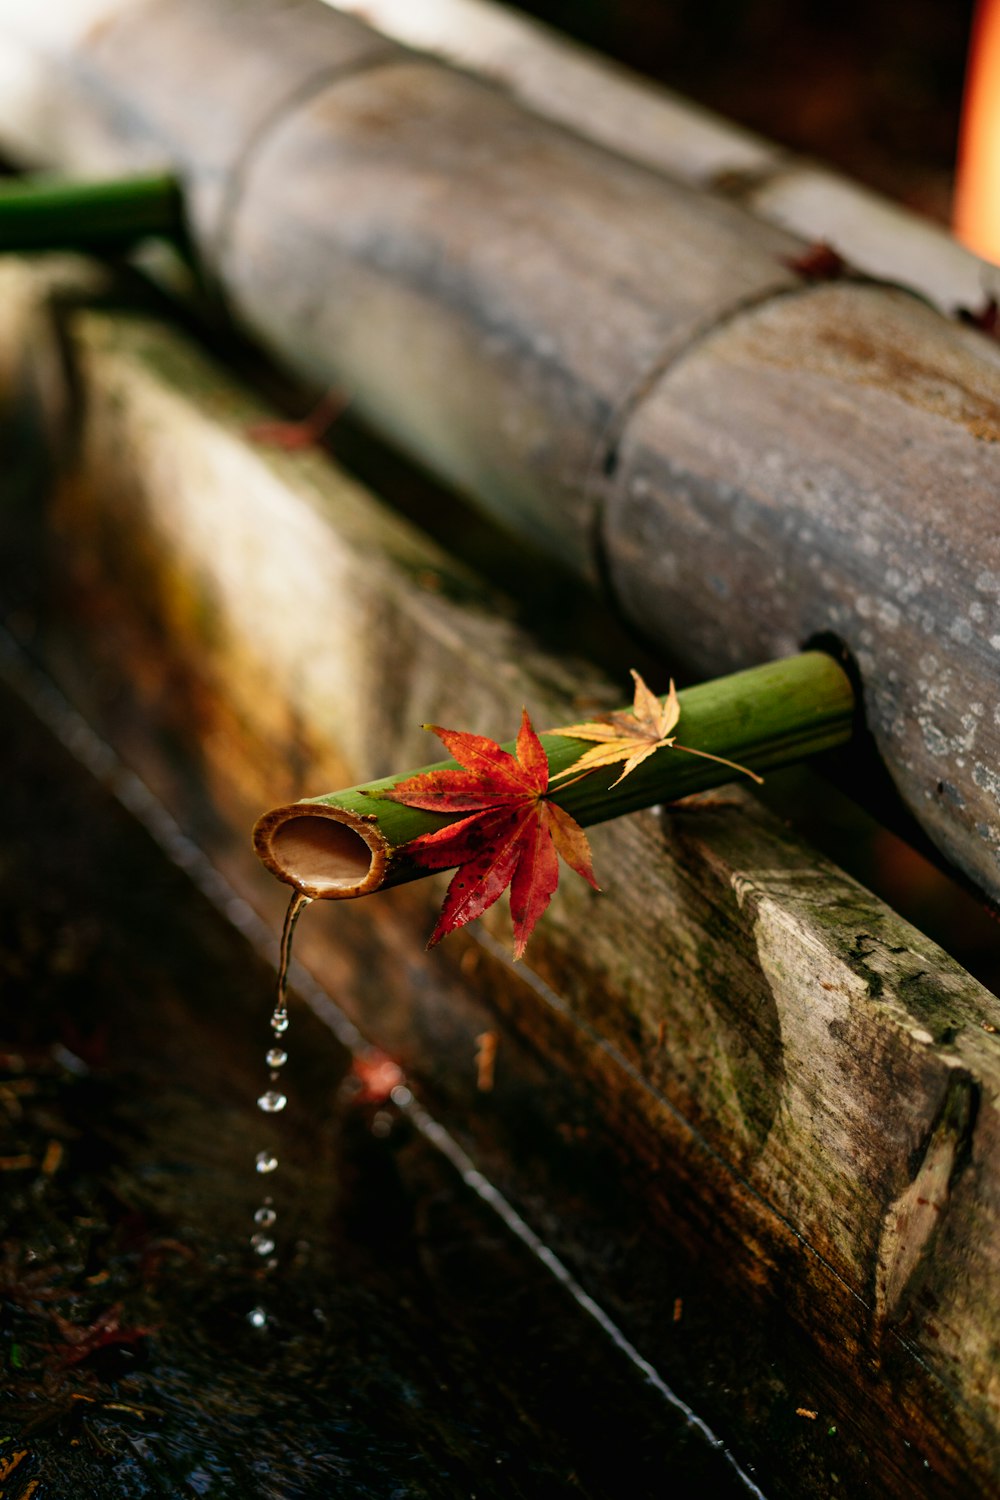 a flower that is sitting on a wooden bench